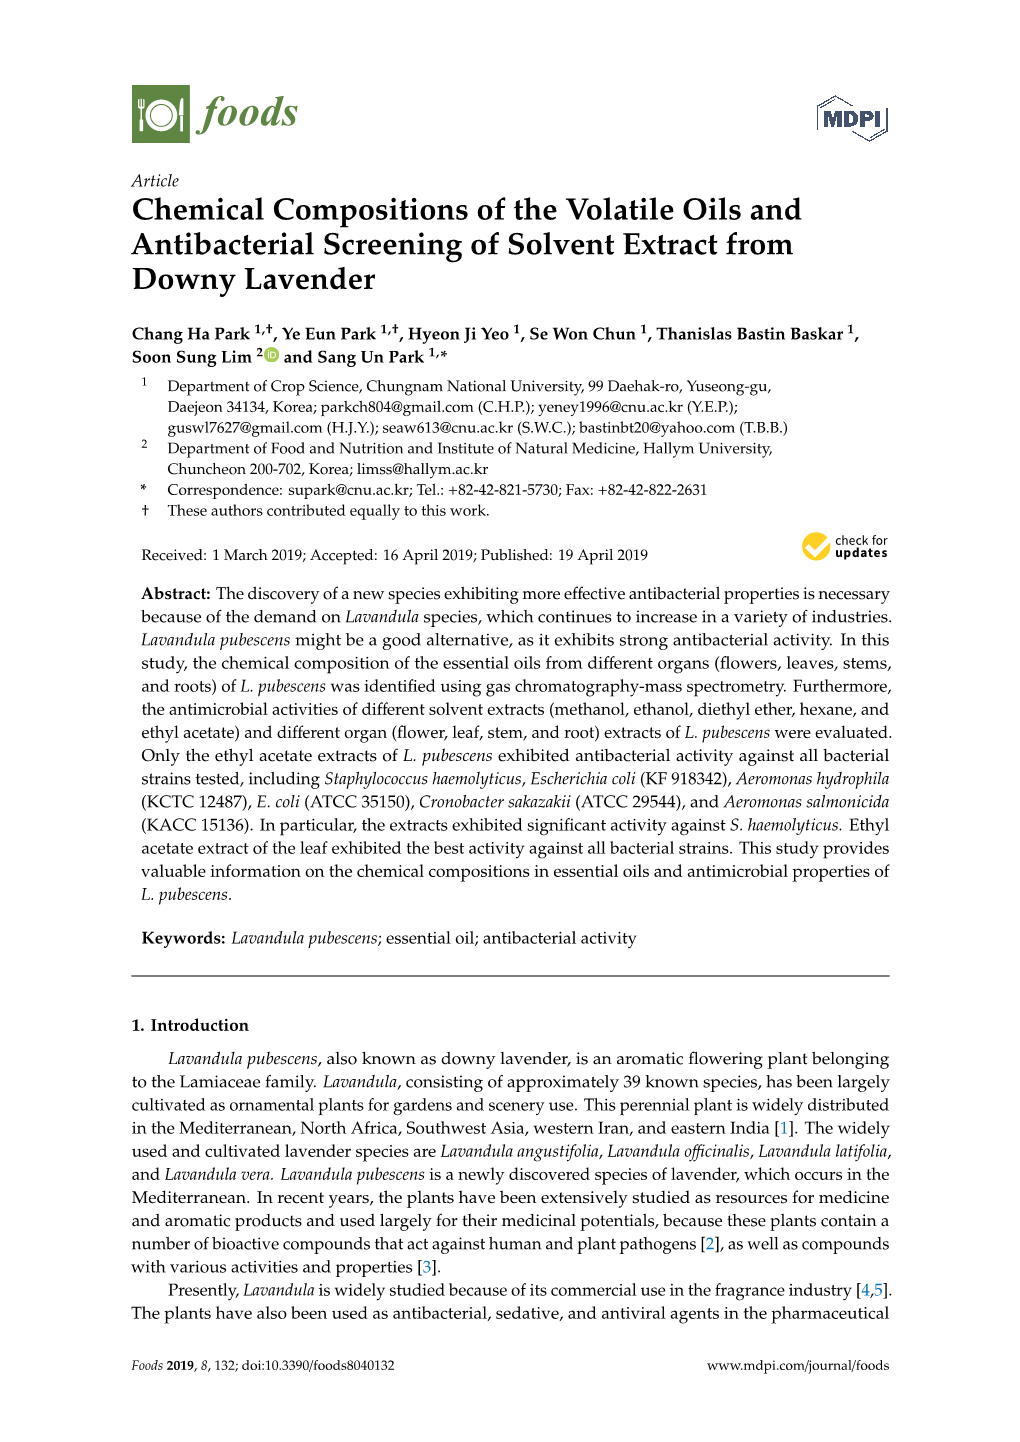 Chemical Compositions of the Volatile Oils and Antibacterial Screening of Solvent Extract from Downy Lavender